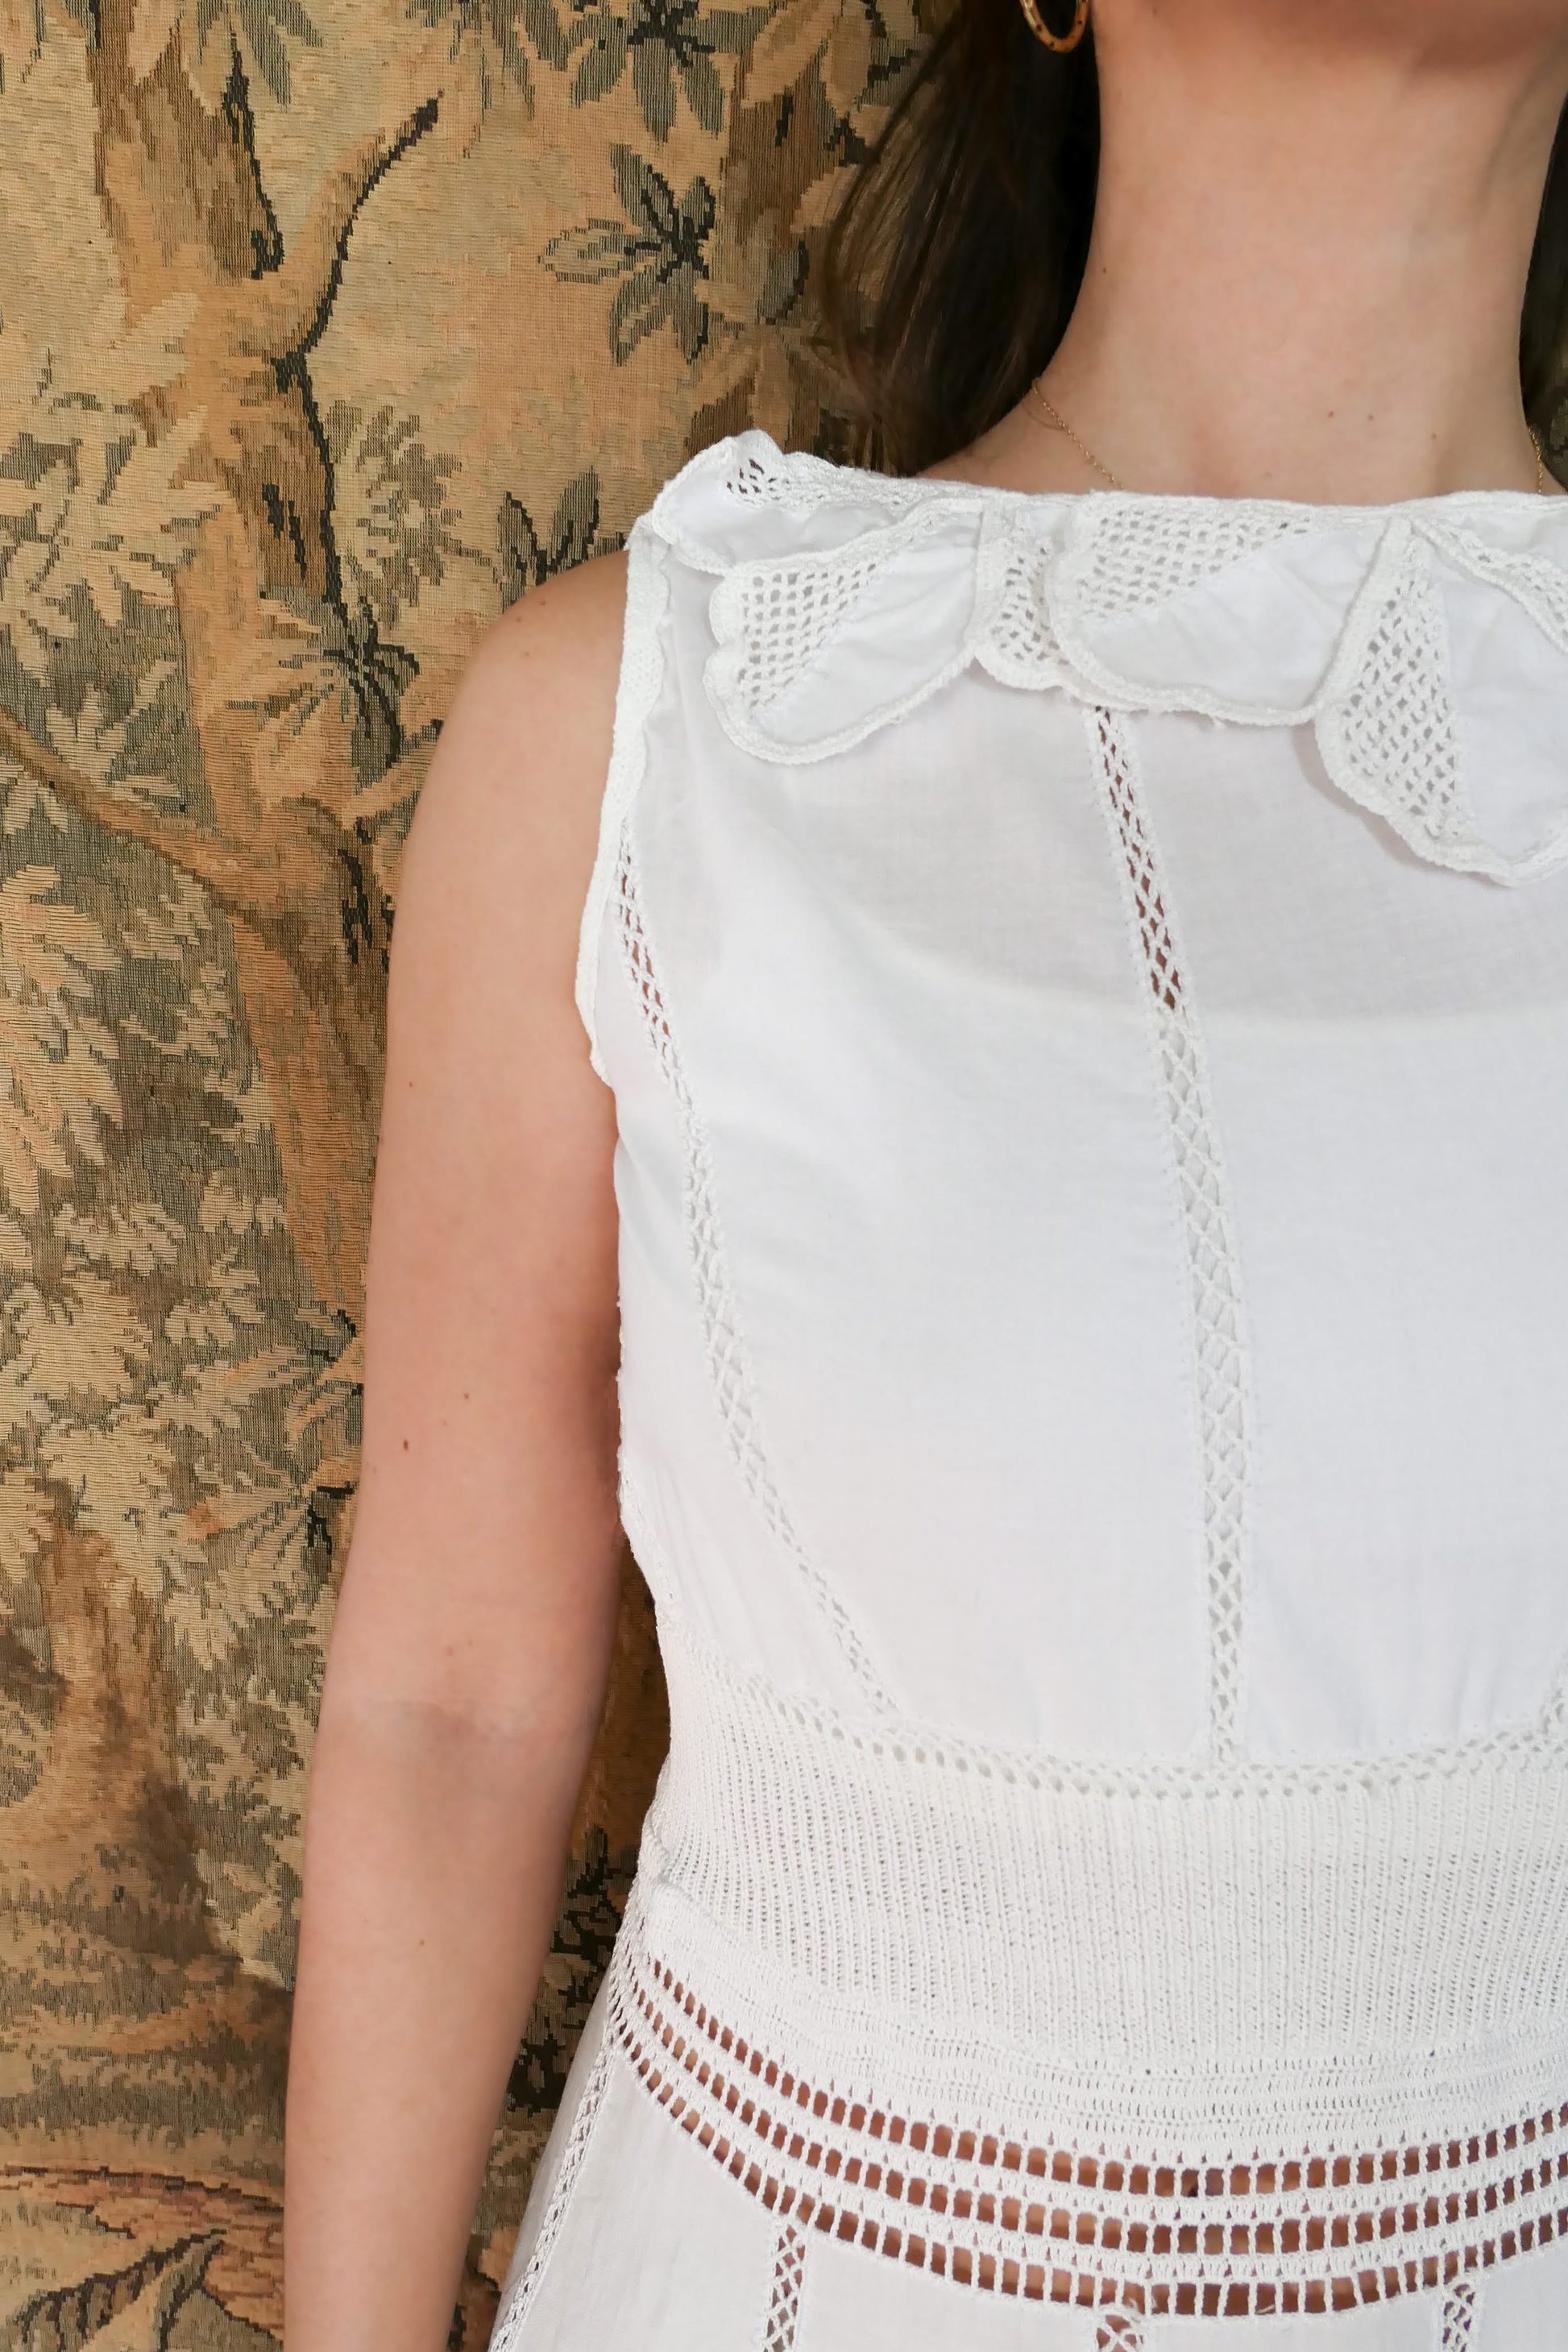 Closeup view of front of dress and collar.  A white cotton midi dress with whimsical crochet and embroidered flowers at the hem and collar, and teardrop shaped eyelet detail on the skirt. Stretchable ribbed knit fabric around the waist adds contour to the dress.